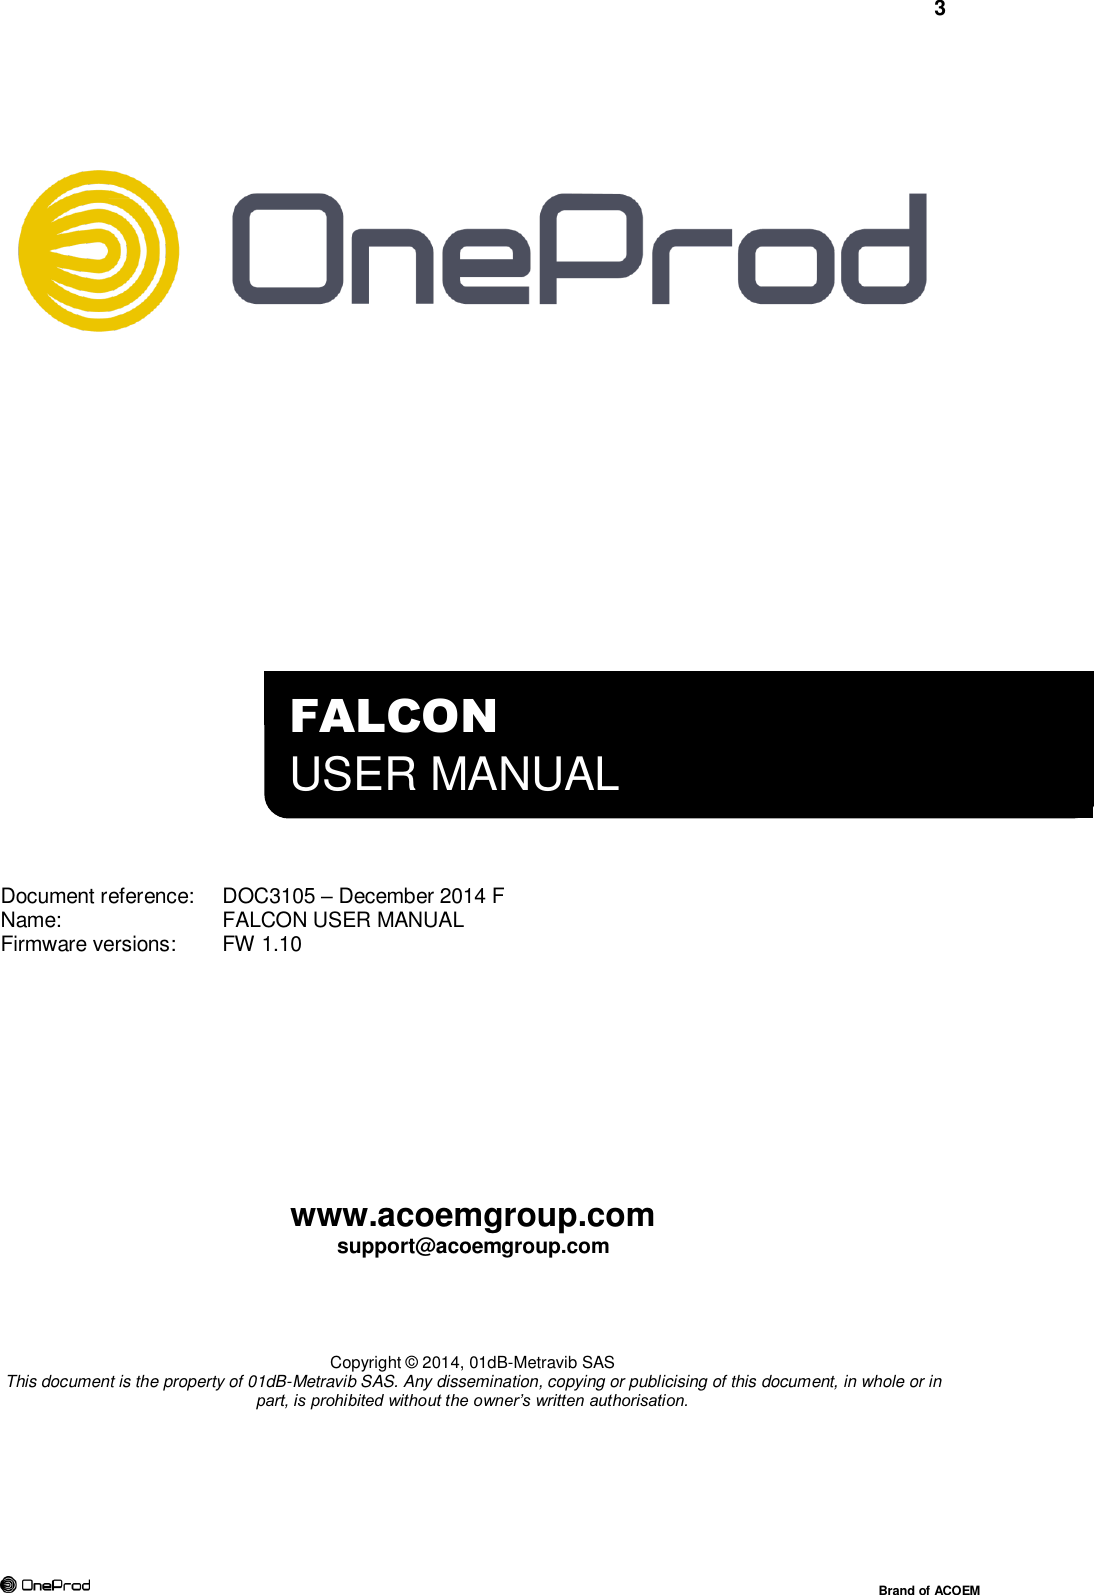 3     Brand of ACOEM                       Document reference:  DOC3105 – December 2014 F Name:      FALCON USER MANUAL Firmware versions:   FW 1.10           www.acoemgroup.com support@acoemgroup.com     Copyright © 2014, 01dB-Metravib SAS This document is the property of 01dB-Metravib SAS. Any dissemination, copying or publicising of this document, in whole or in part, is prohibited without the owner’s written authorisation.   FALCON  USER MANUAL 